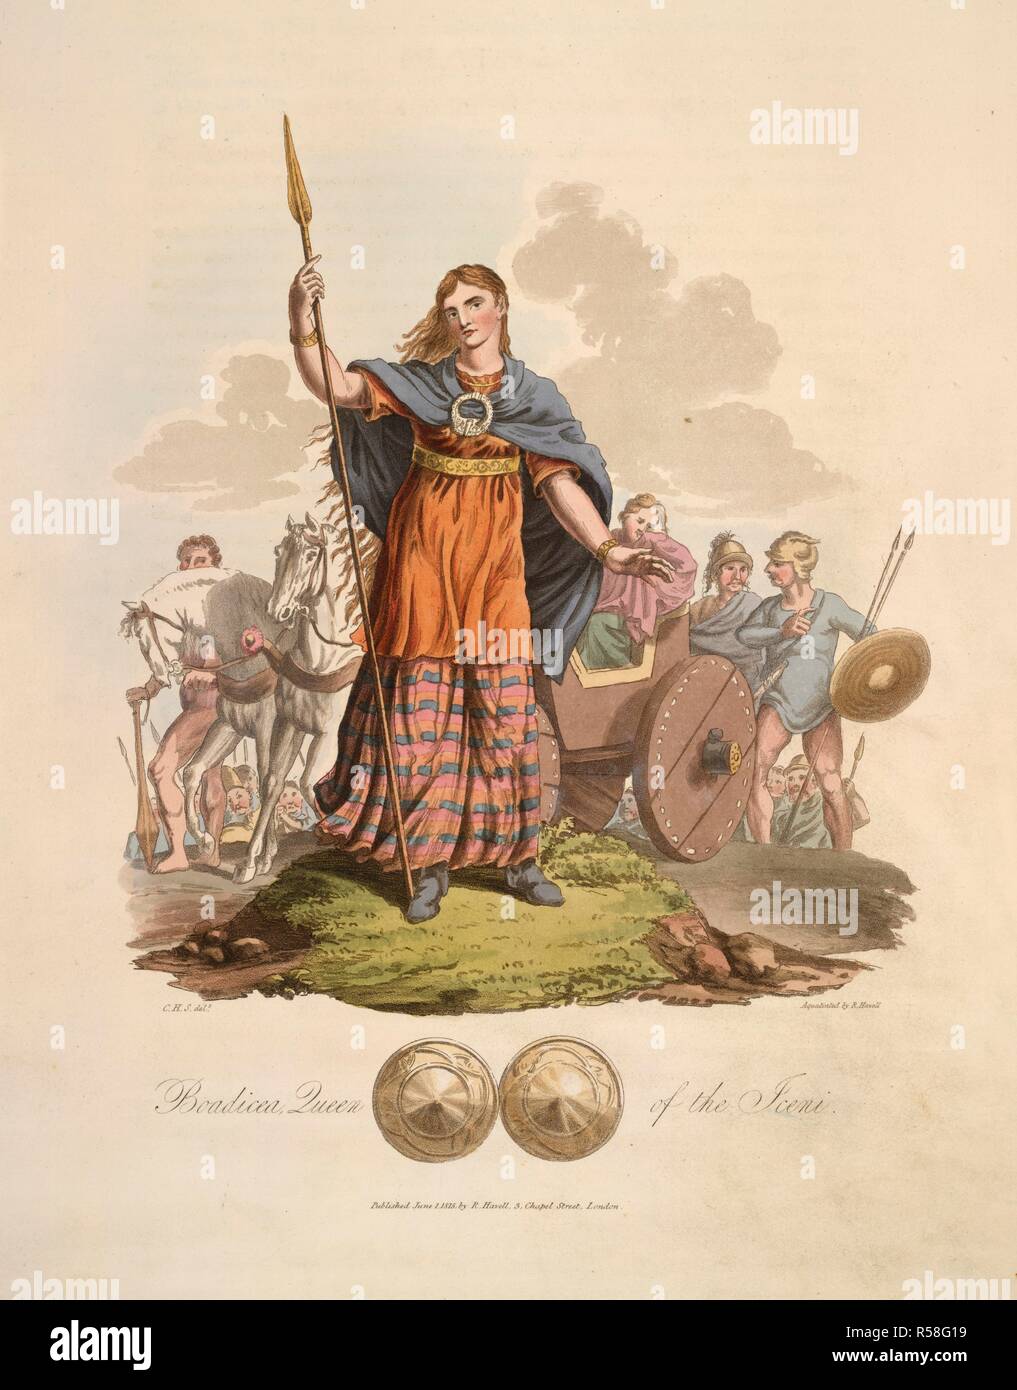 Boadicea Queen of the Iceni. The Costume of the original inhabitants of the Bri. R. Havell: London, 1815. Boudicca, d.61 A.D. British warrior queen. She wears a pais woven chequerwise of many colours. Over this a Gwn. On her shoulders a cloak fastened by a fibula. At the bottom of plate is represented a pair of bronze breats plates, discovered near Polden Hill, Somersetshire.  Image taken from The Costume of the original inhabitants of the British Islands from the earliest periods to the sixth century, to which is added that of theGothic nations on the Western Coasts of the Baltic, the ancesto Stock Photo